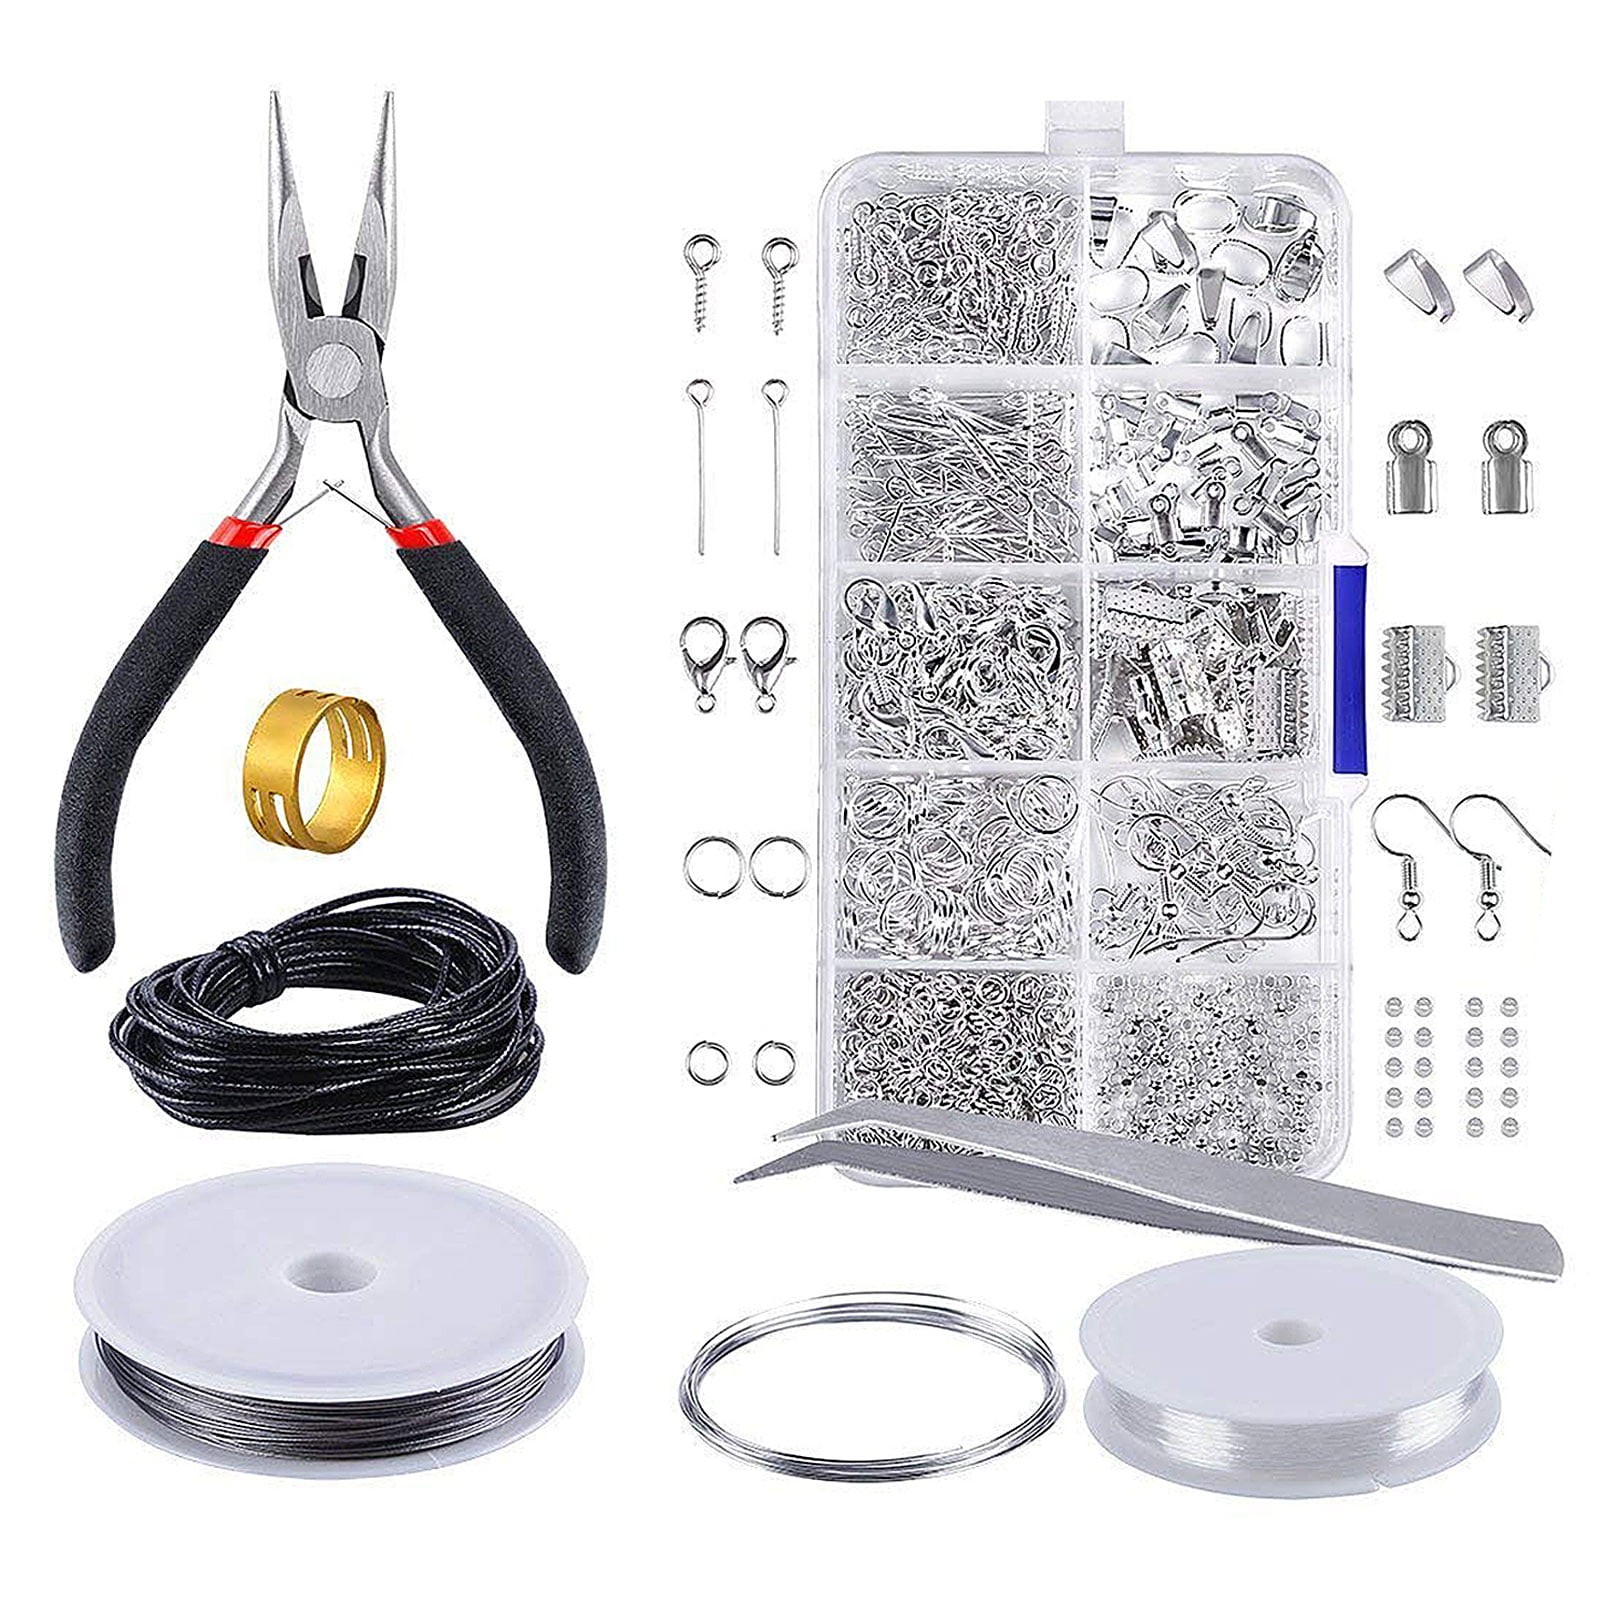 Jewelry Making Supplies Kit for Starter Beading Making and Repair Tools Full Set 